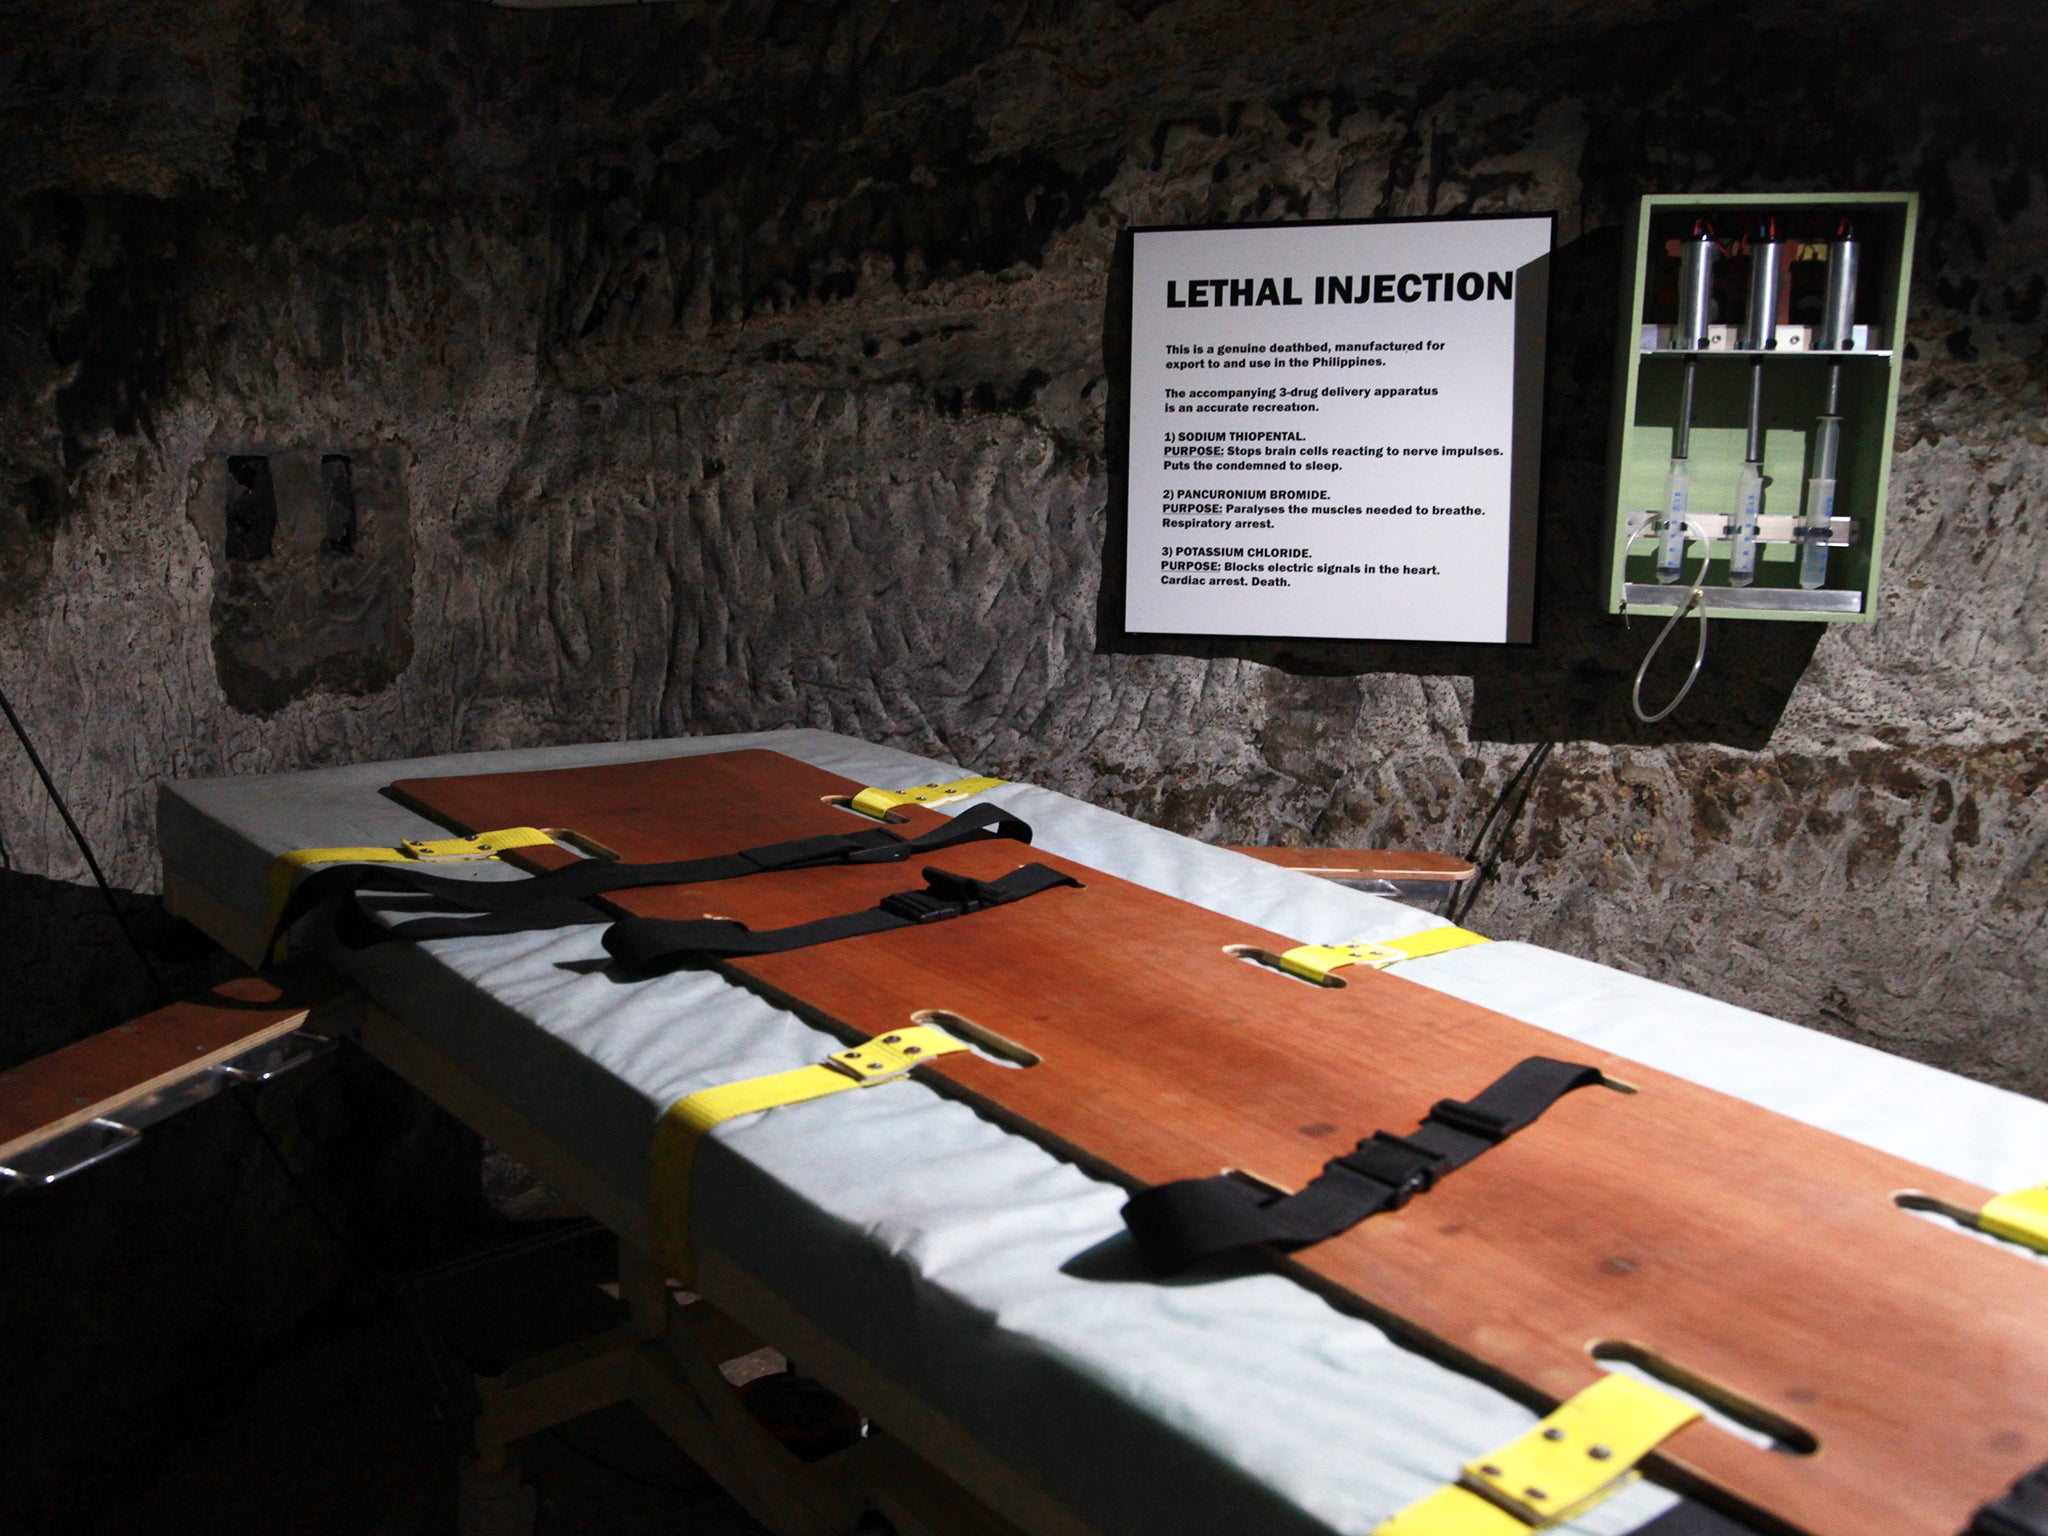 A lethal injection death bed on display at the True Crime museum in Hastings, UK. Ohio has run out of supplies of lethal injection drugs and has suspended all executions